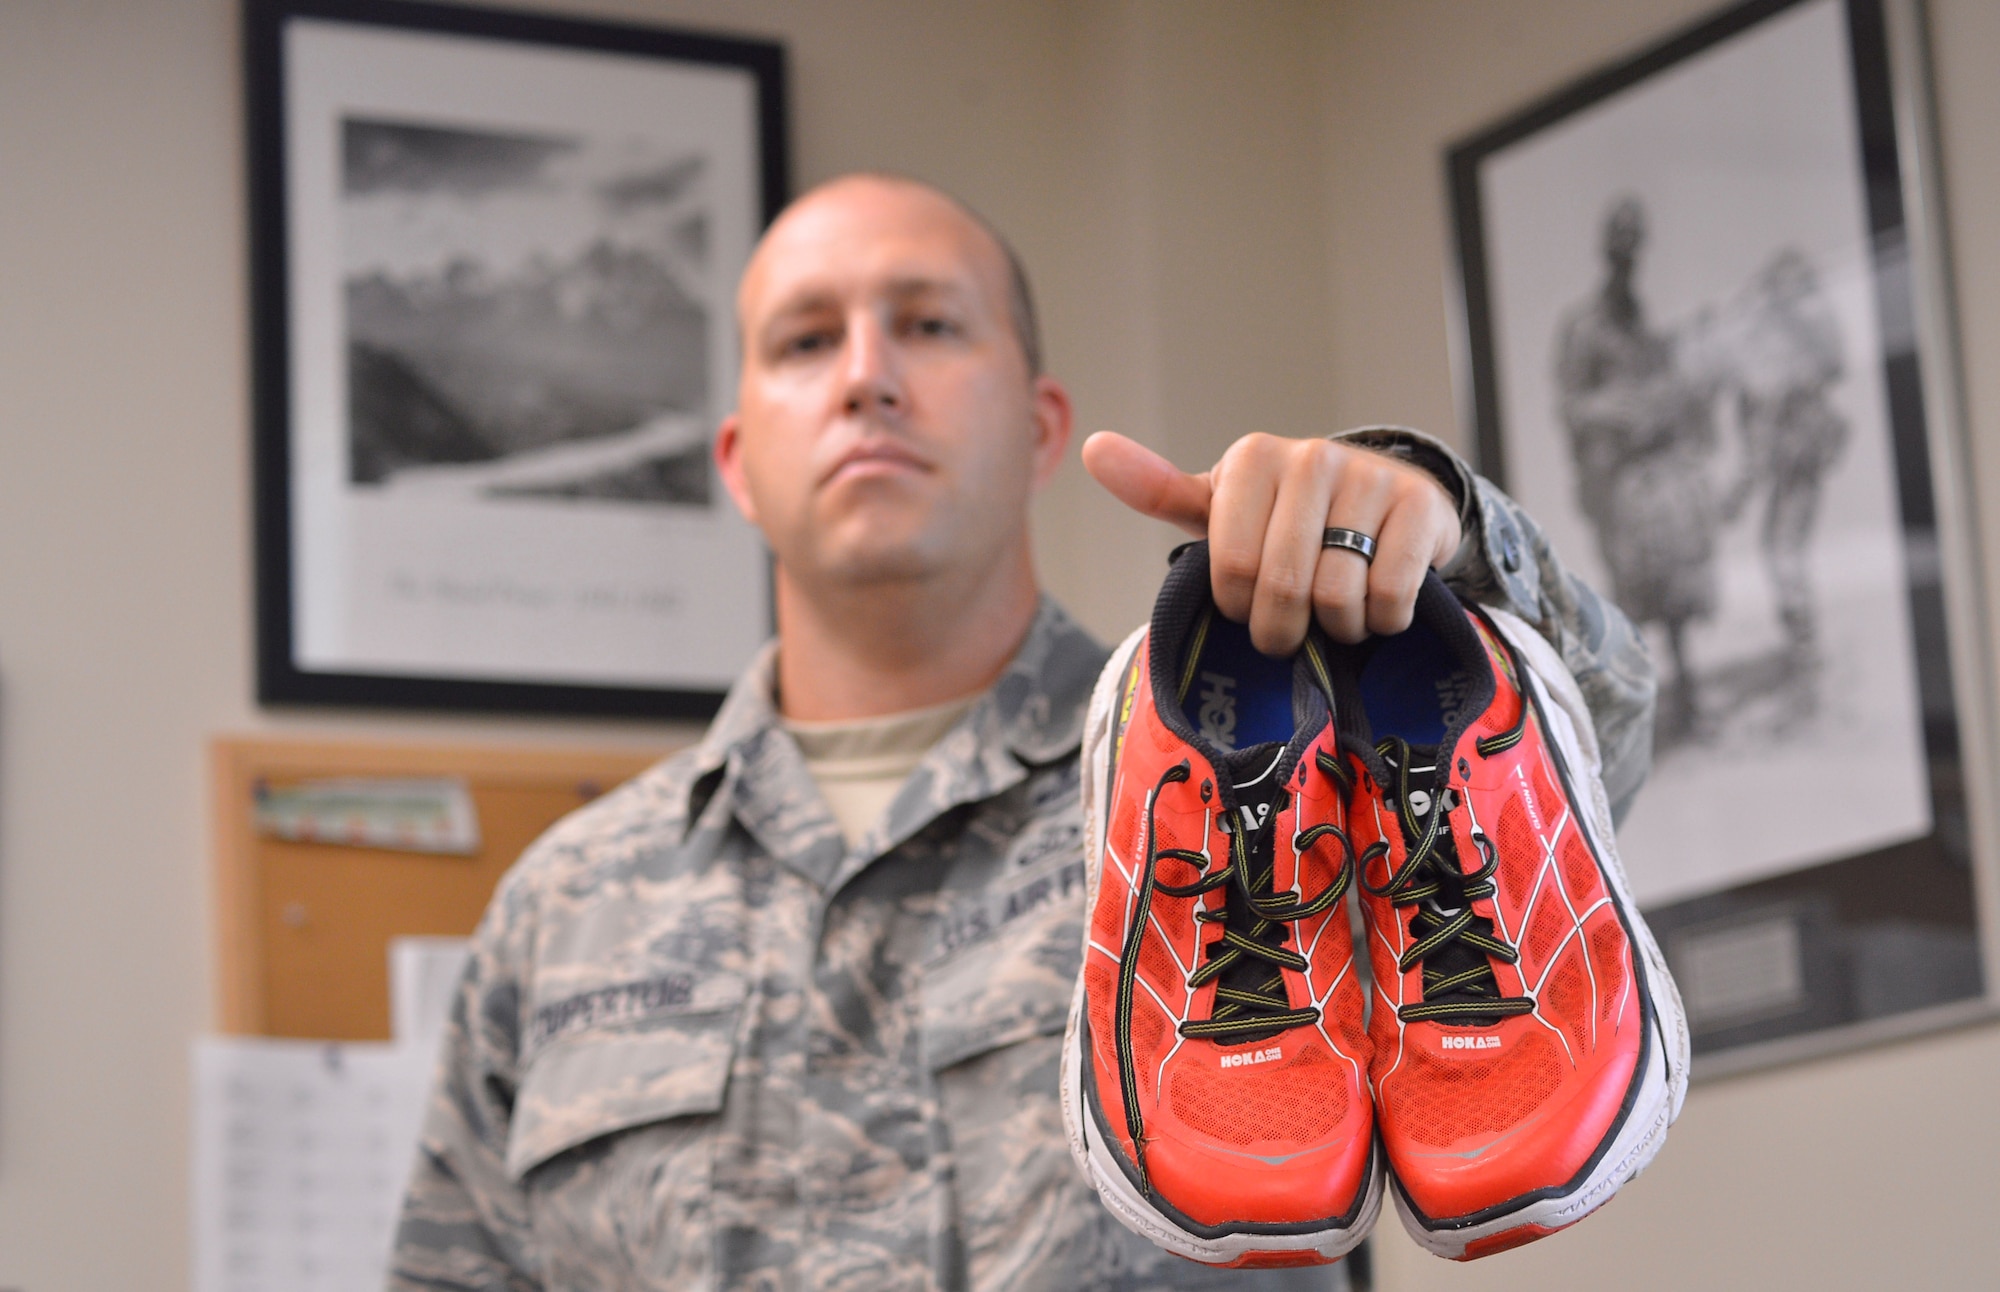 Master Sgt. Michael Dupertuis, aircrew flight equipment superintendent assigned to the 6th Operations Support Squadron at MacDill Air Force Base, Florida, is part of a select group of athletes driven to compete in the sport of ultramarathon running.  To date, he has completed two ultramarathons and many shorter long-distance races. (Photo by Alannah Don)